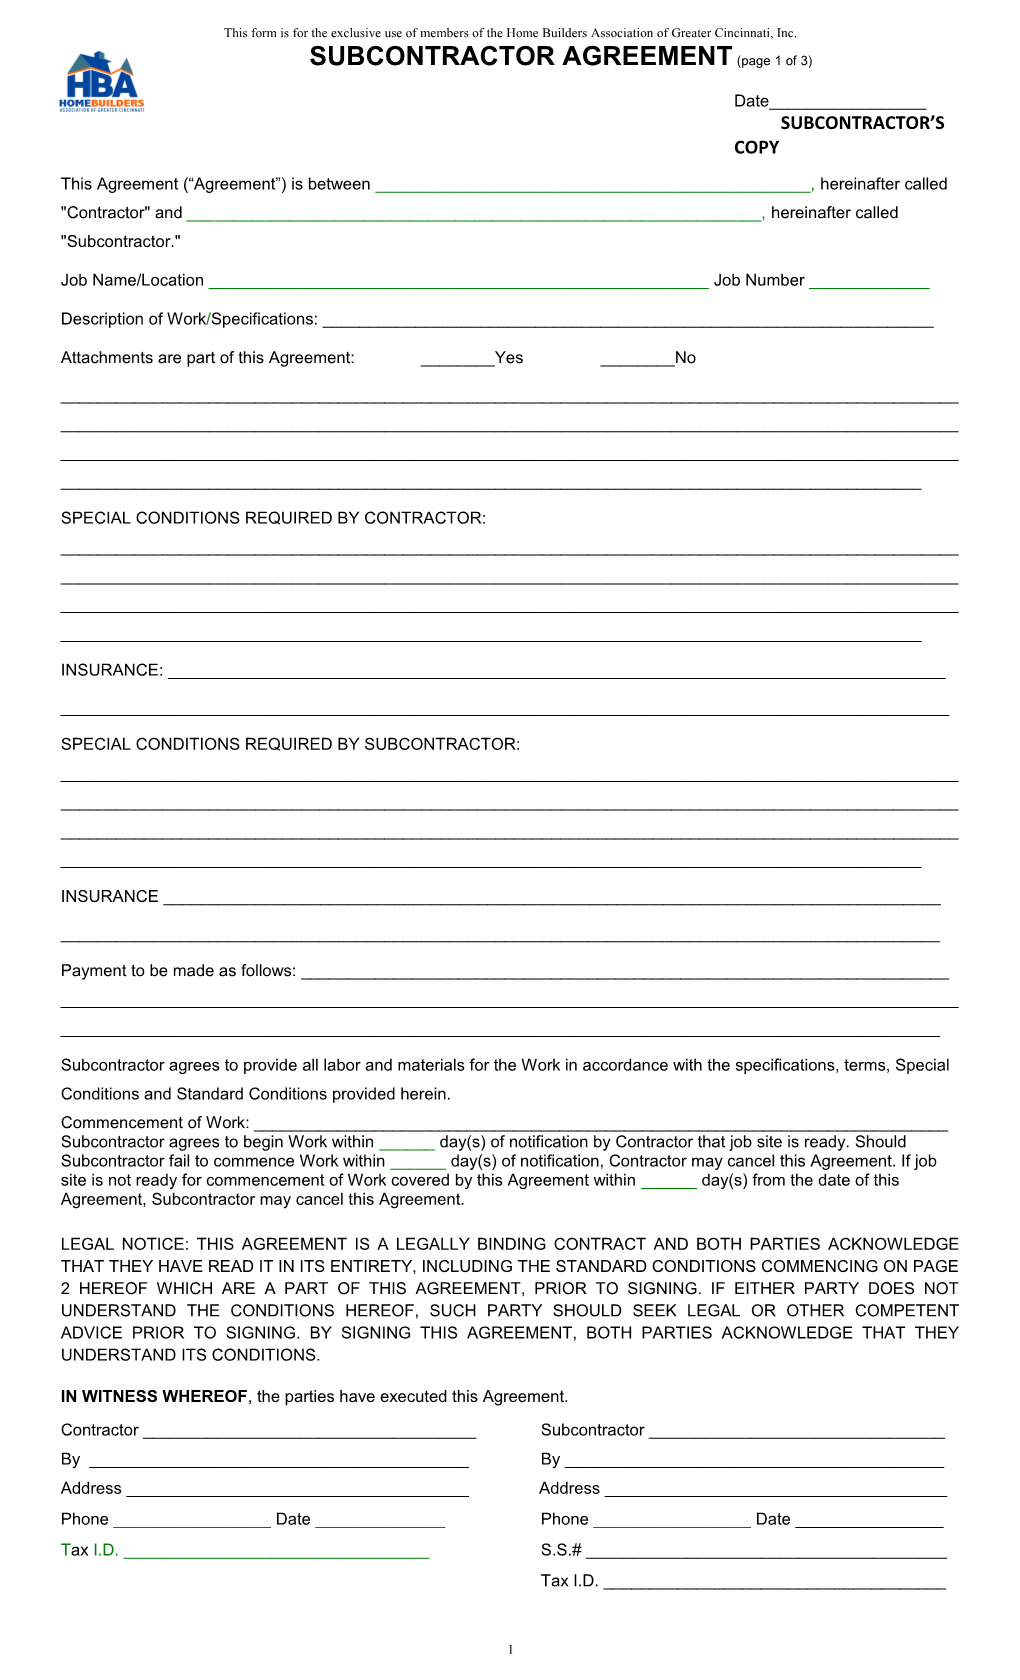 This Form Is for the Exclusive Use of Members of the Home Builders Association of Greater